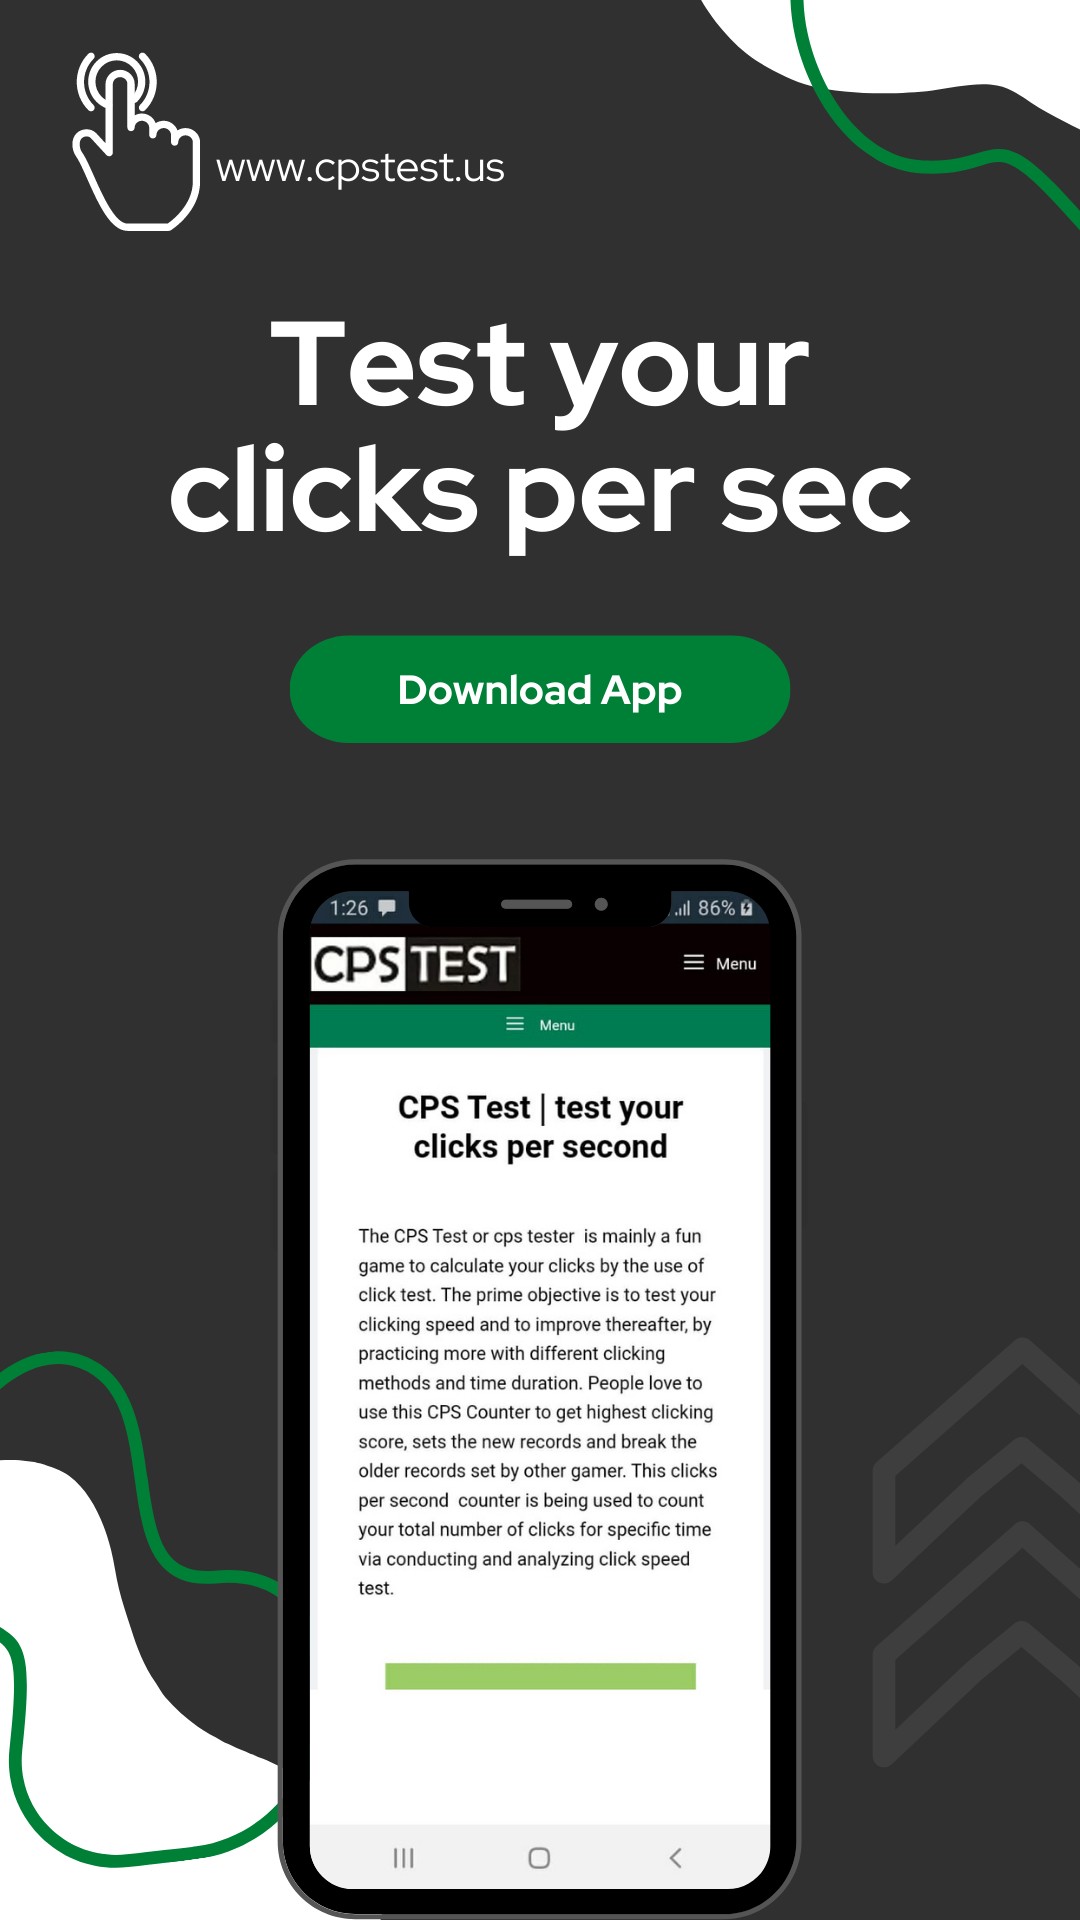 Cps Test Reviews  Read Customer Service Reviews of cps-test.io